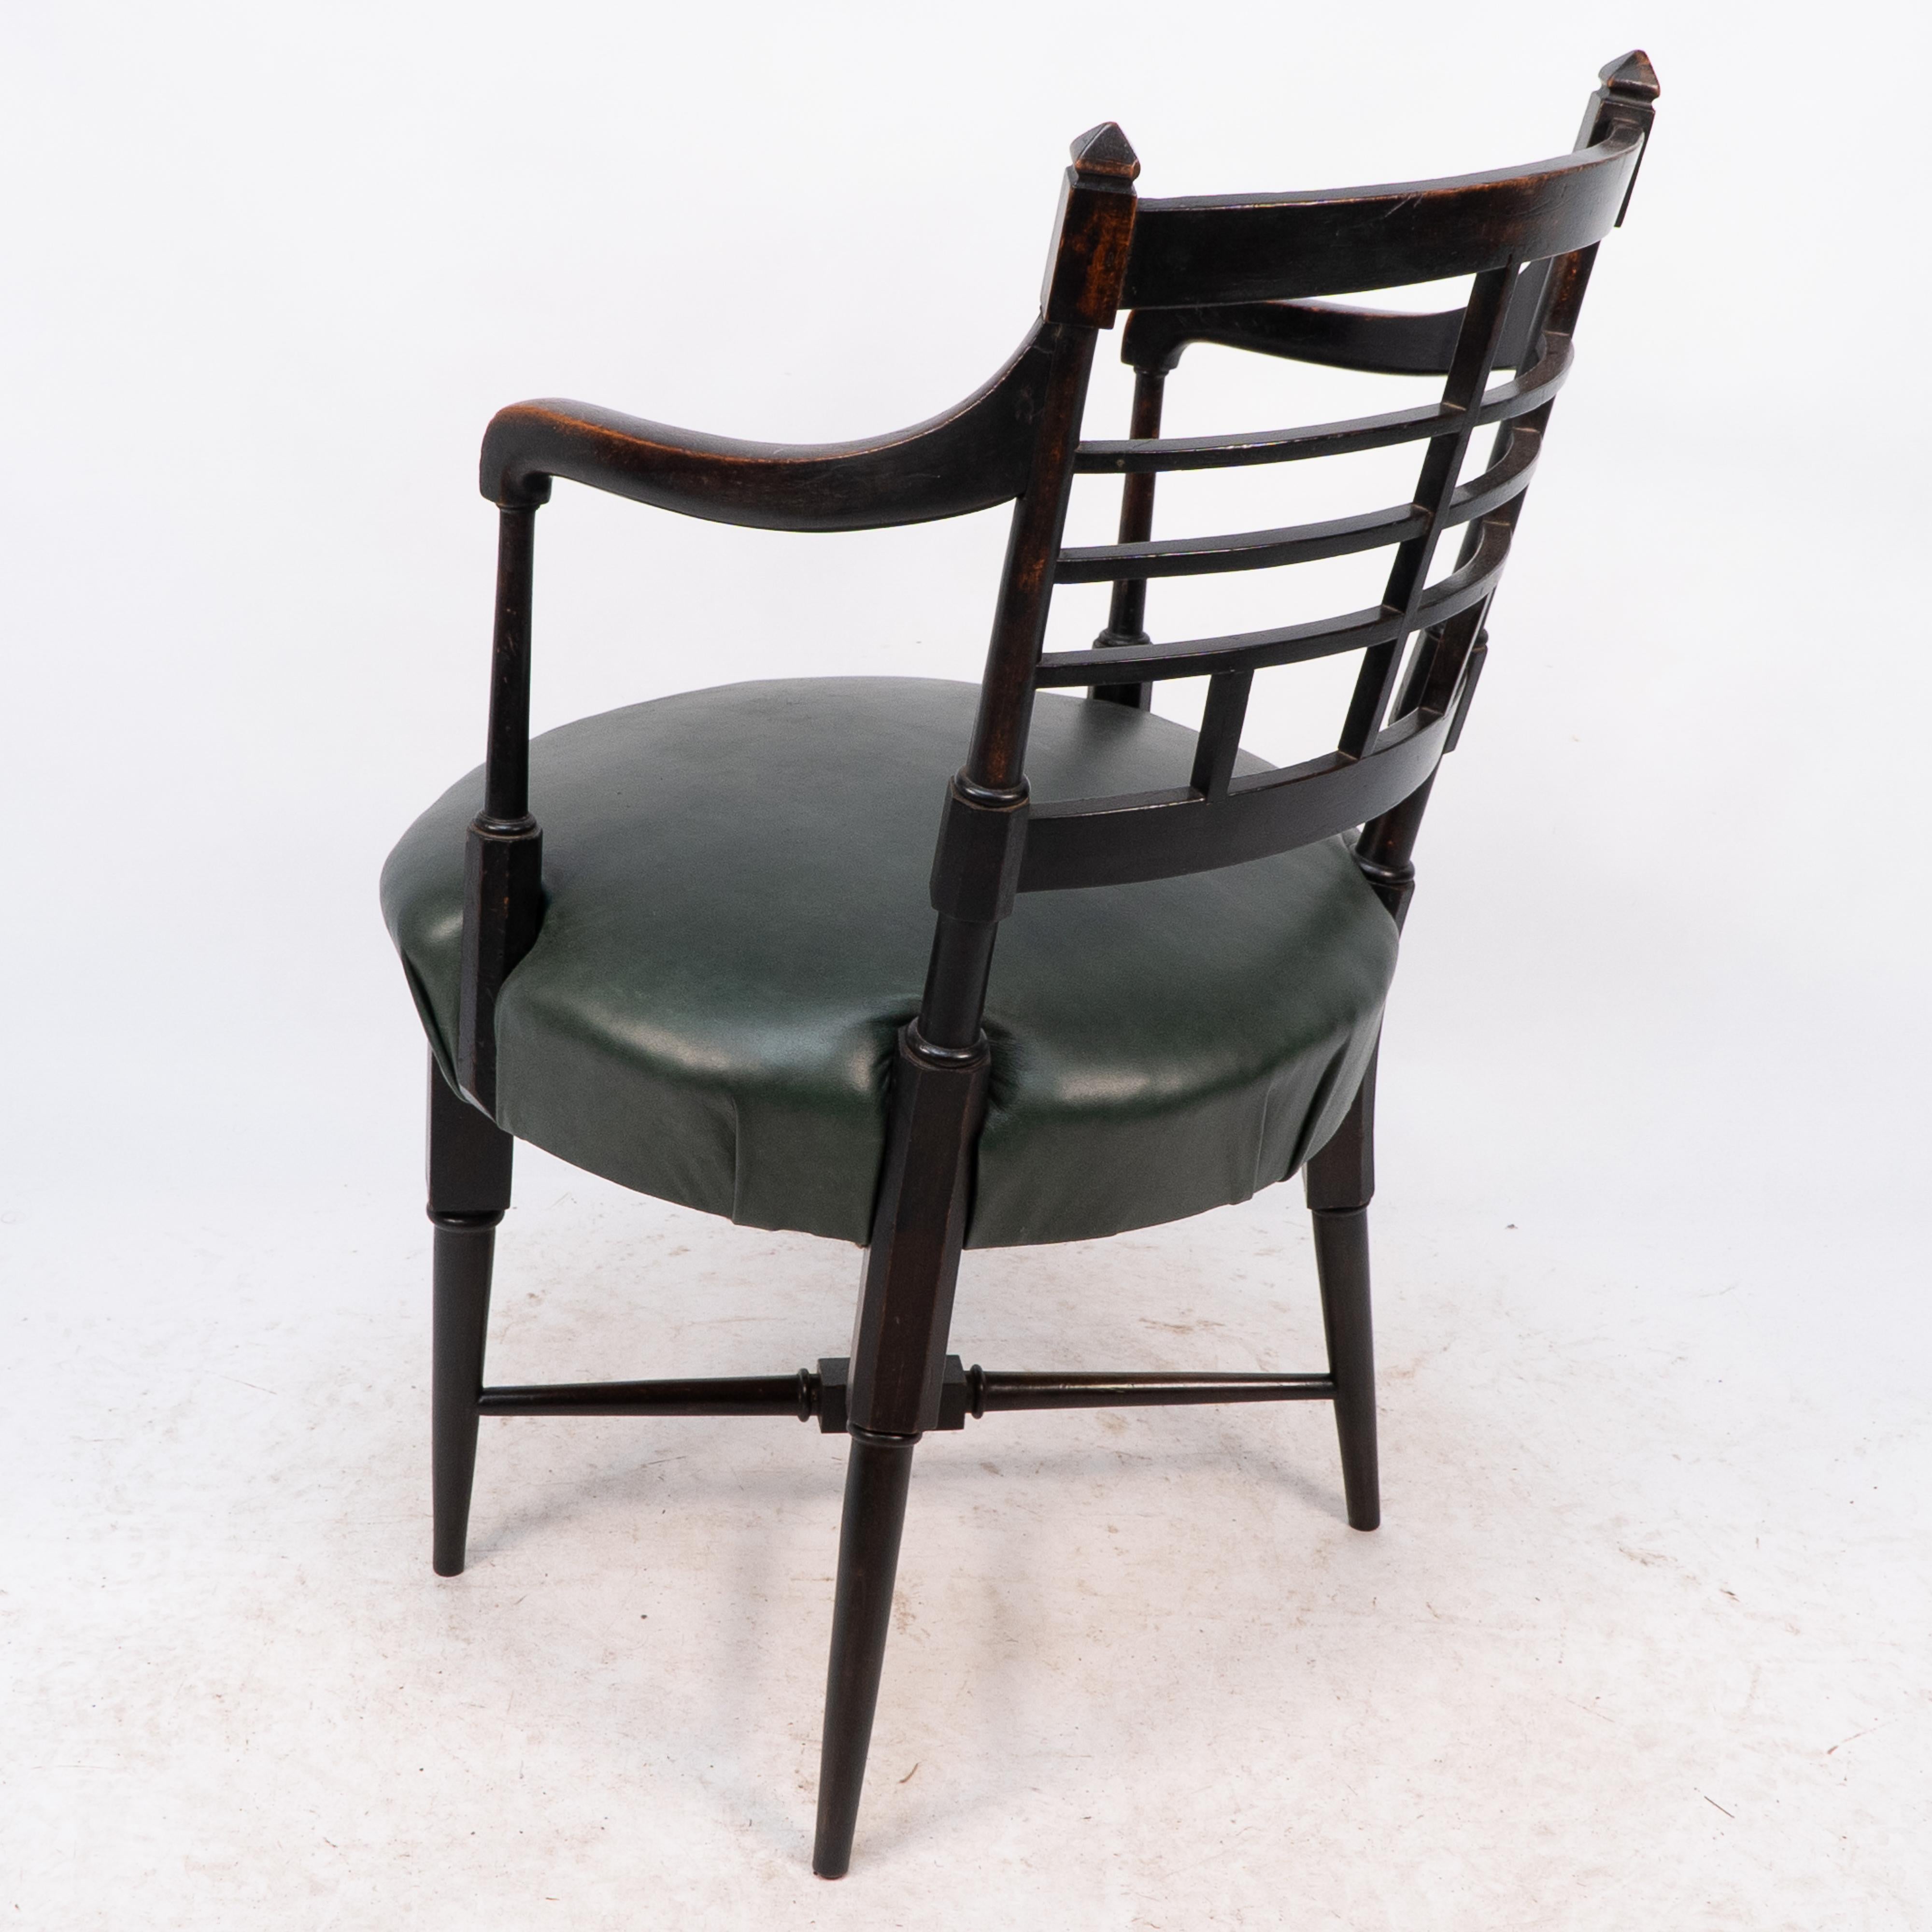 E W Godwin for William Watt. An Anglo-Japanese Old English or Jacobean armchair For Sale 9